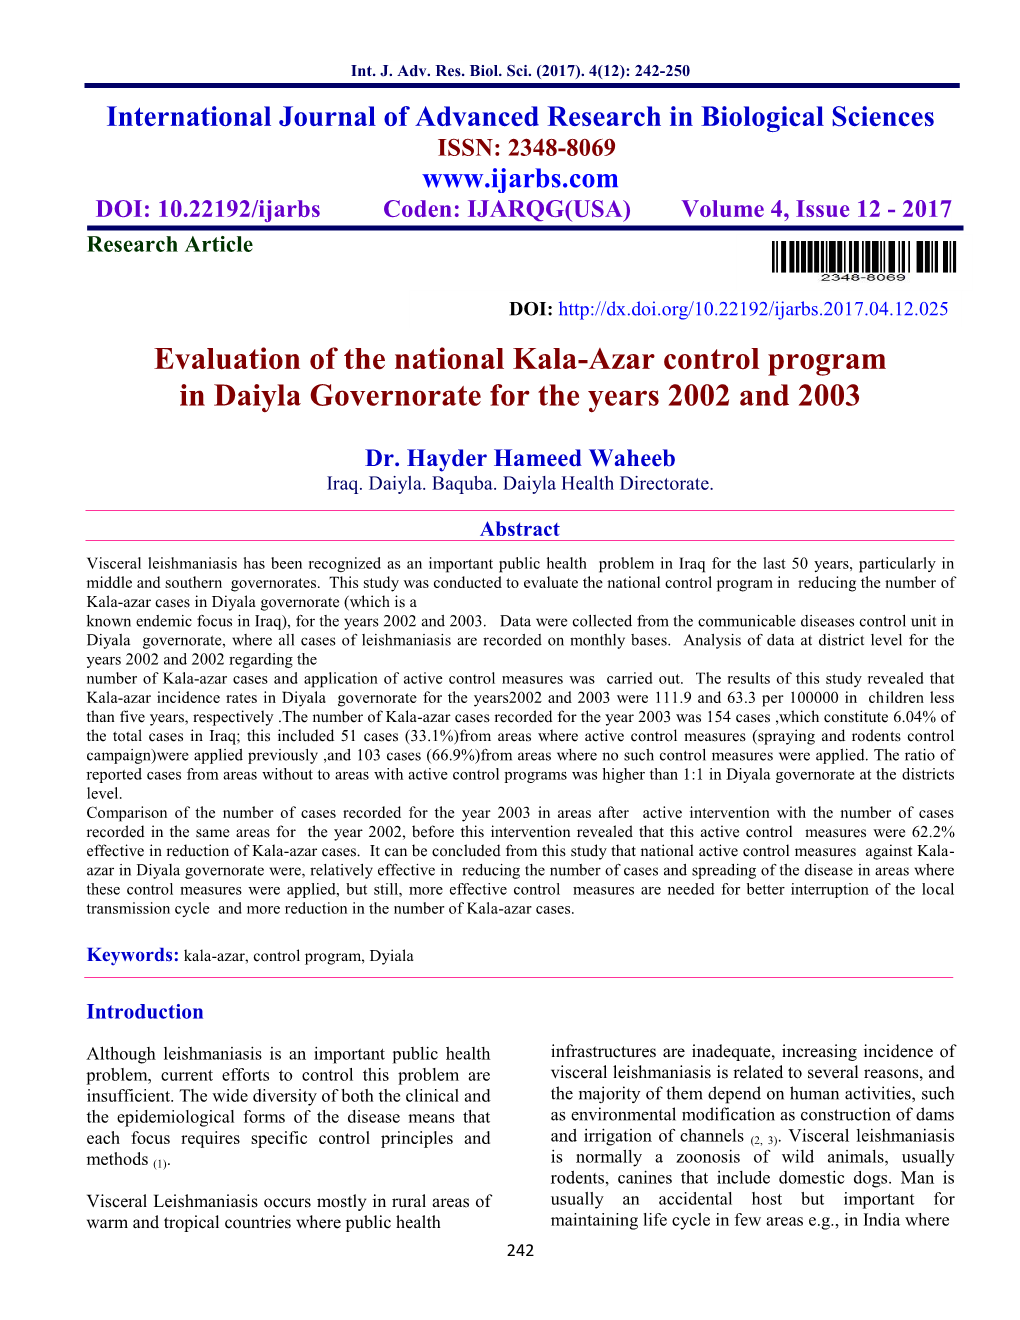 Evaluation of the National Kala-Azar Control Program in Daiyla Governorate for the Years 2002 and 2003